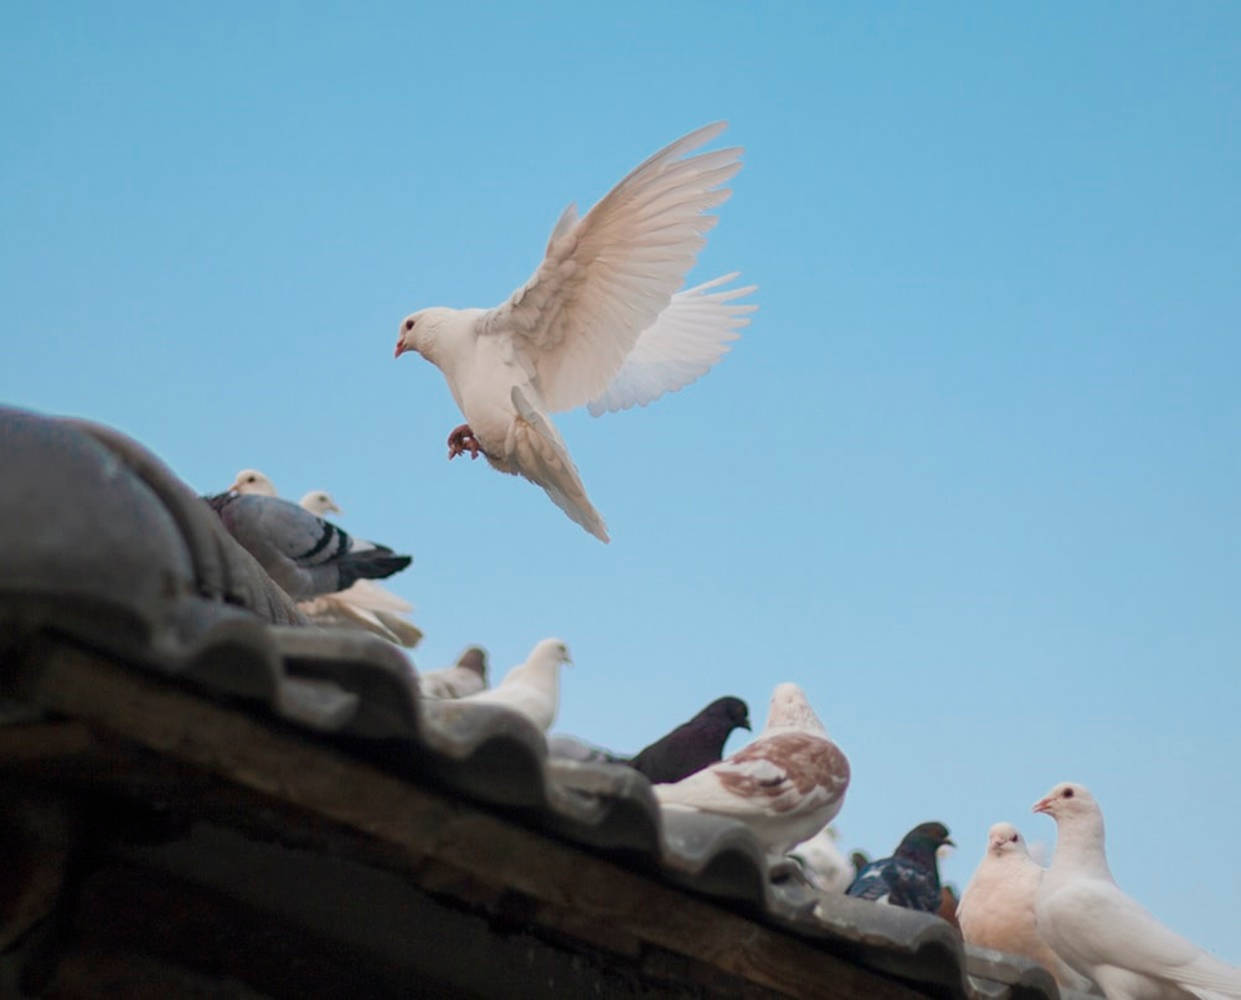 Doves And Pigeons On A Roof Wallpaper